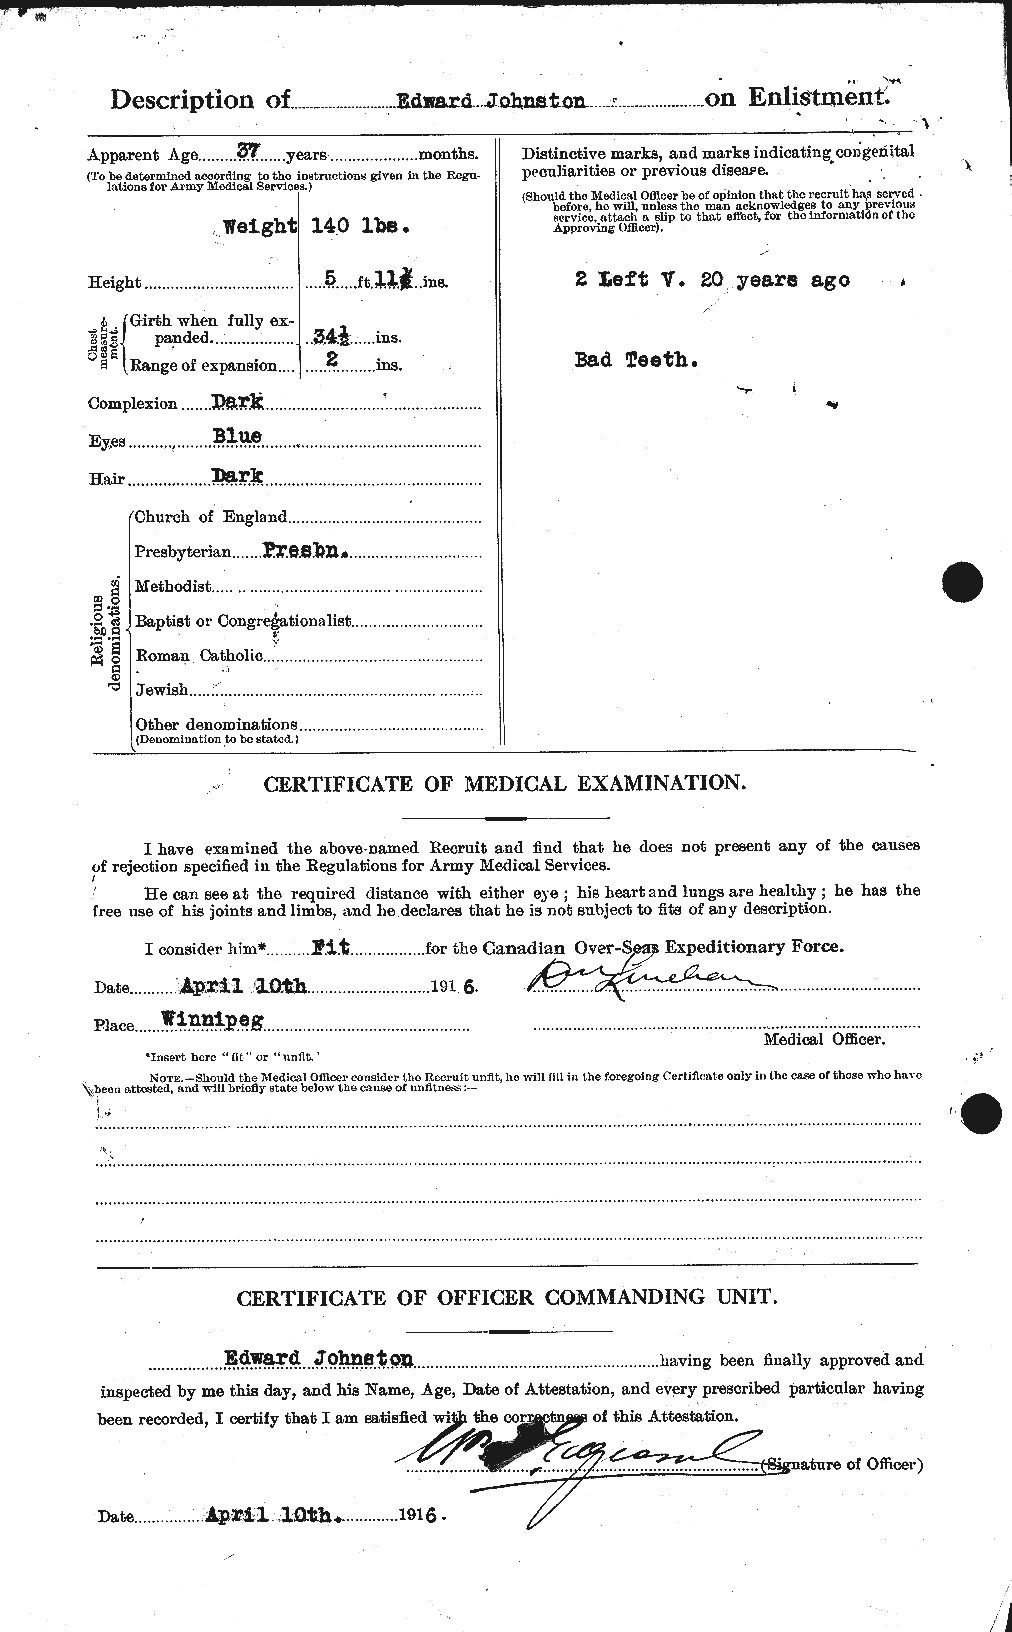 Personnel Records of the First World War - CEF 423221b